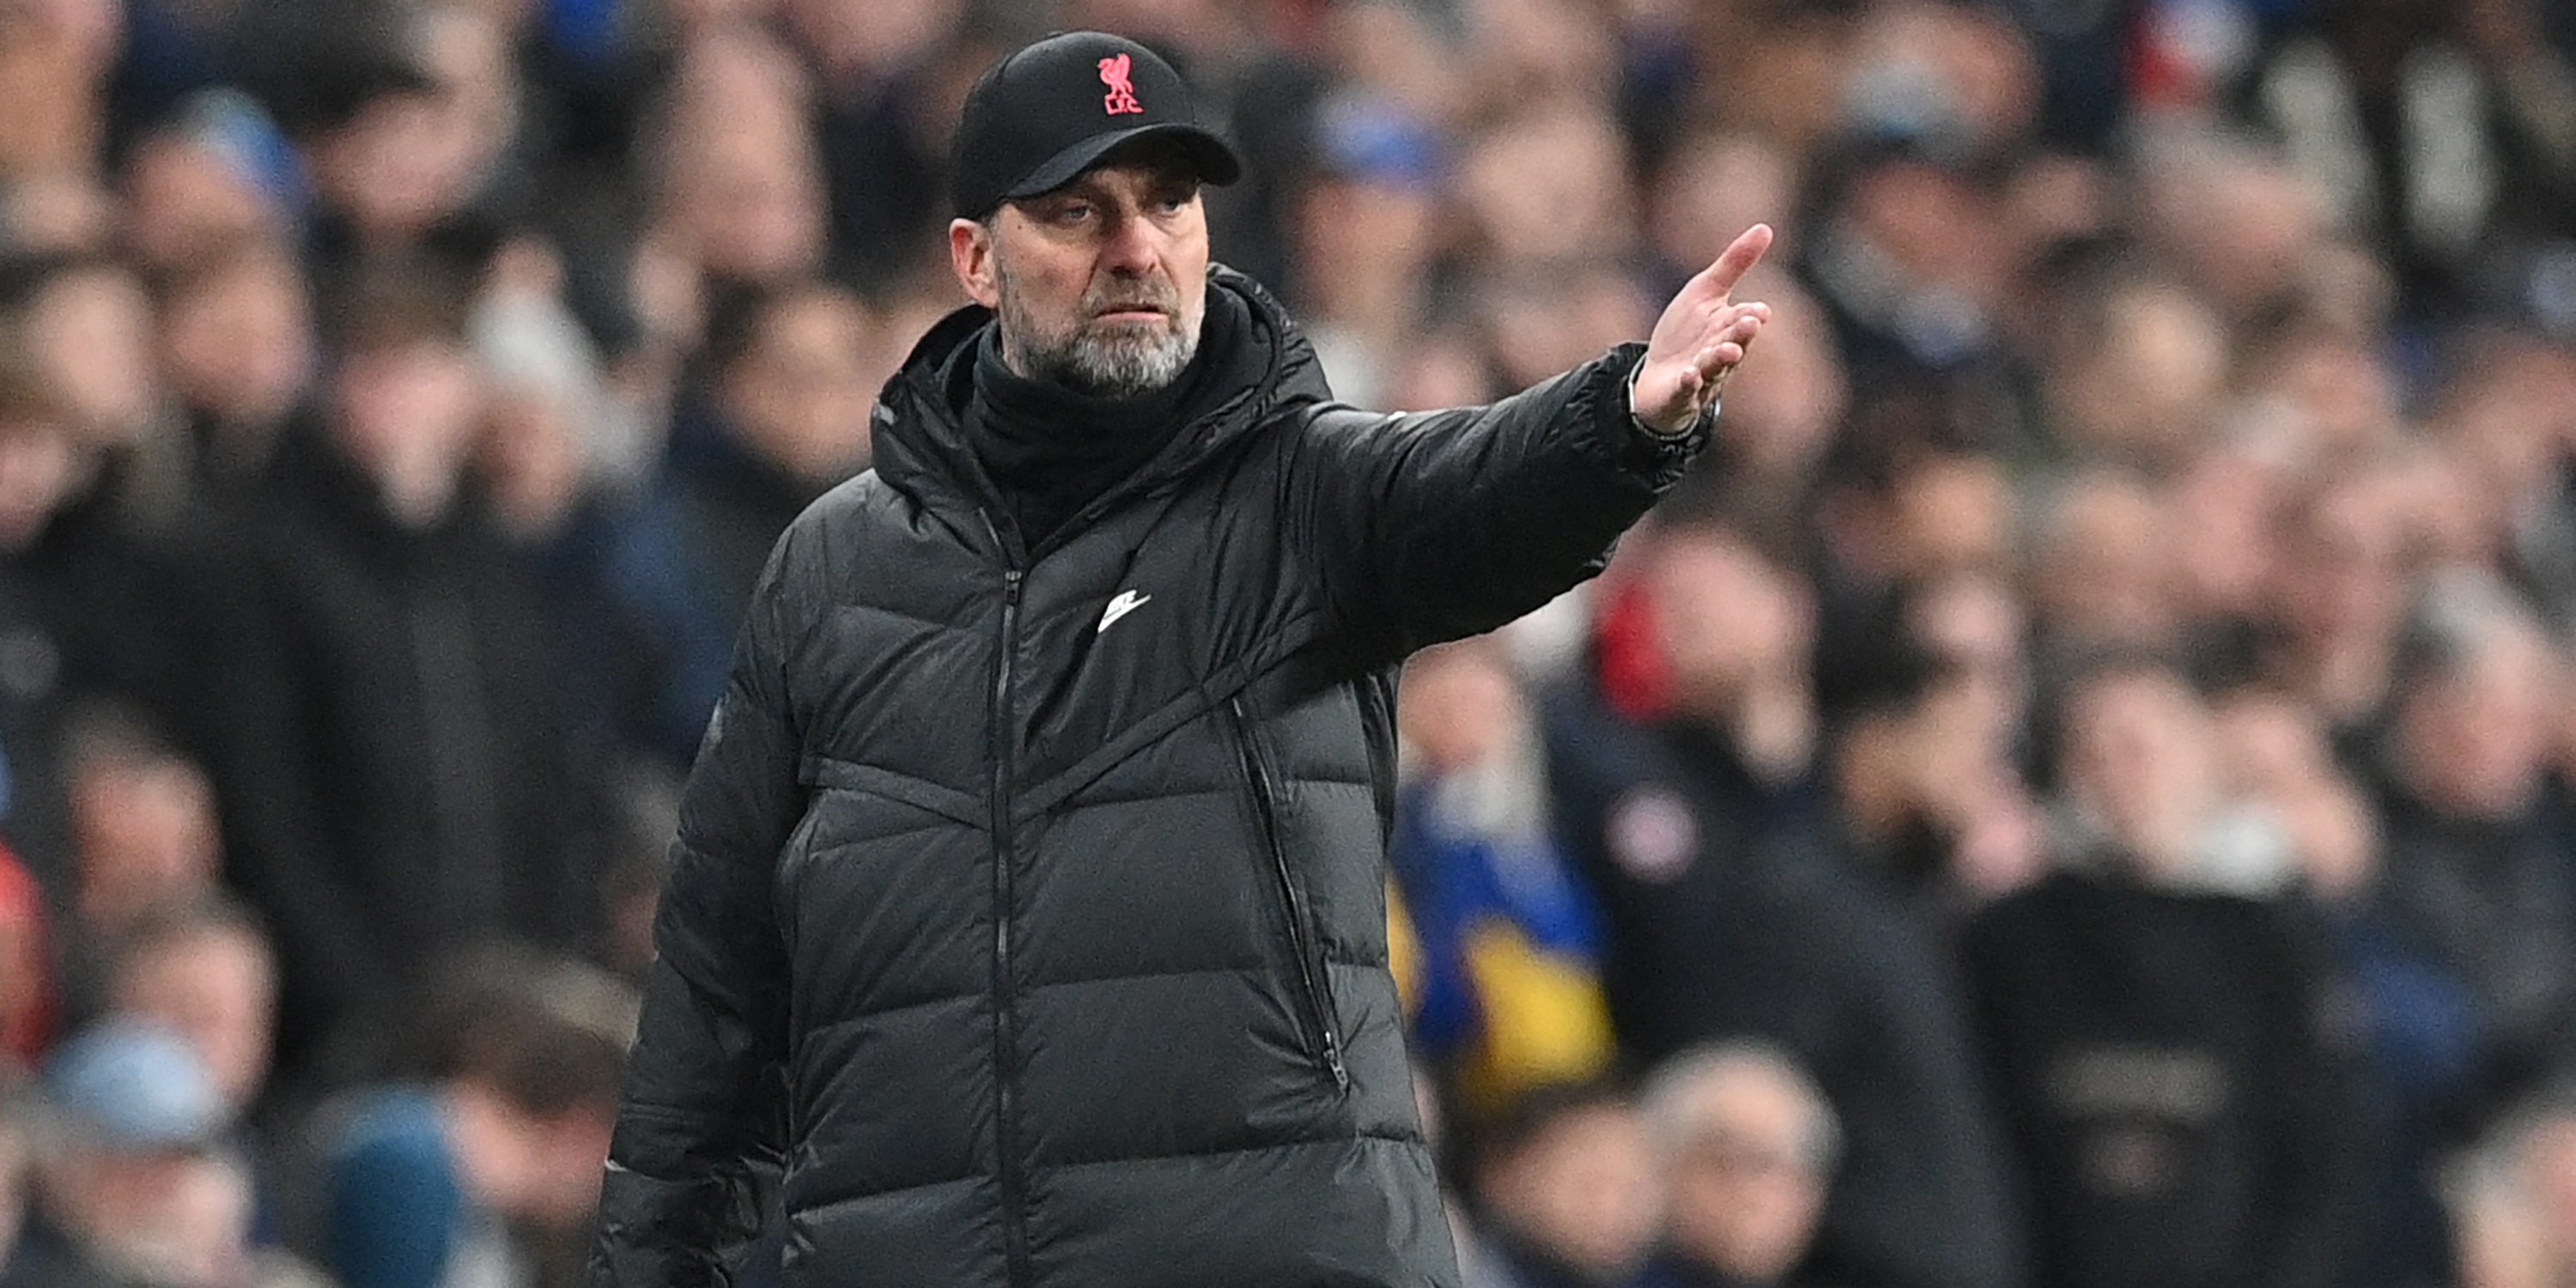 ‘Would ramp it up another notch’ – Paul Merson explains how Liverpool can earn a ‘big psychological edge’ over Manchester City